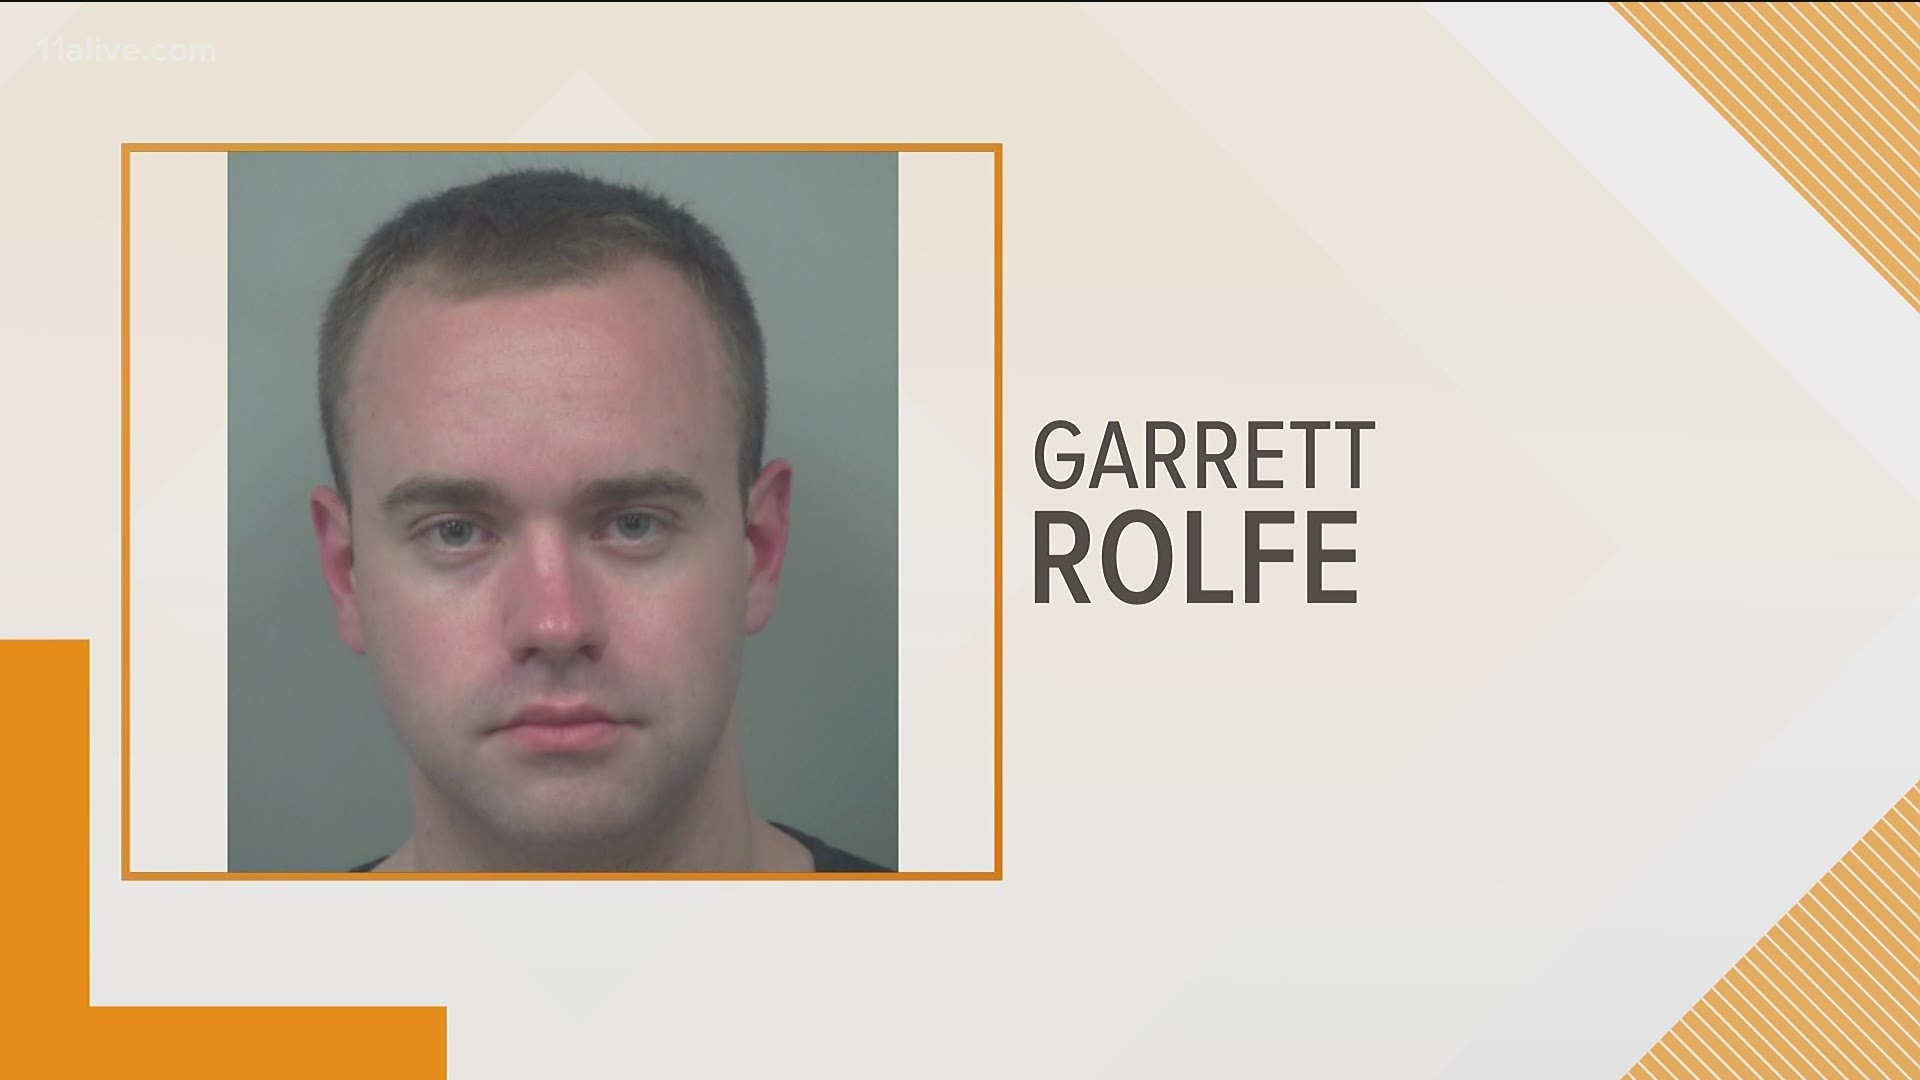 Garrett Rolfe turned himself in to authorities on Thursday and will face a first court appearance at noon on Friday.